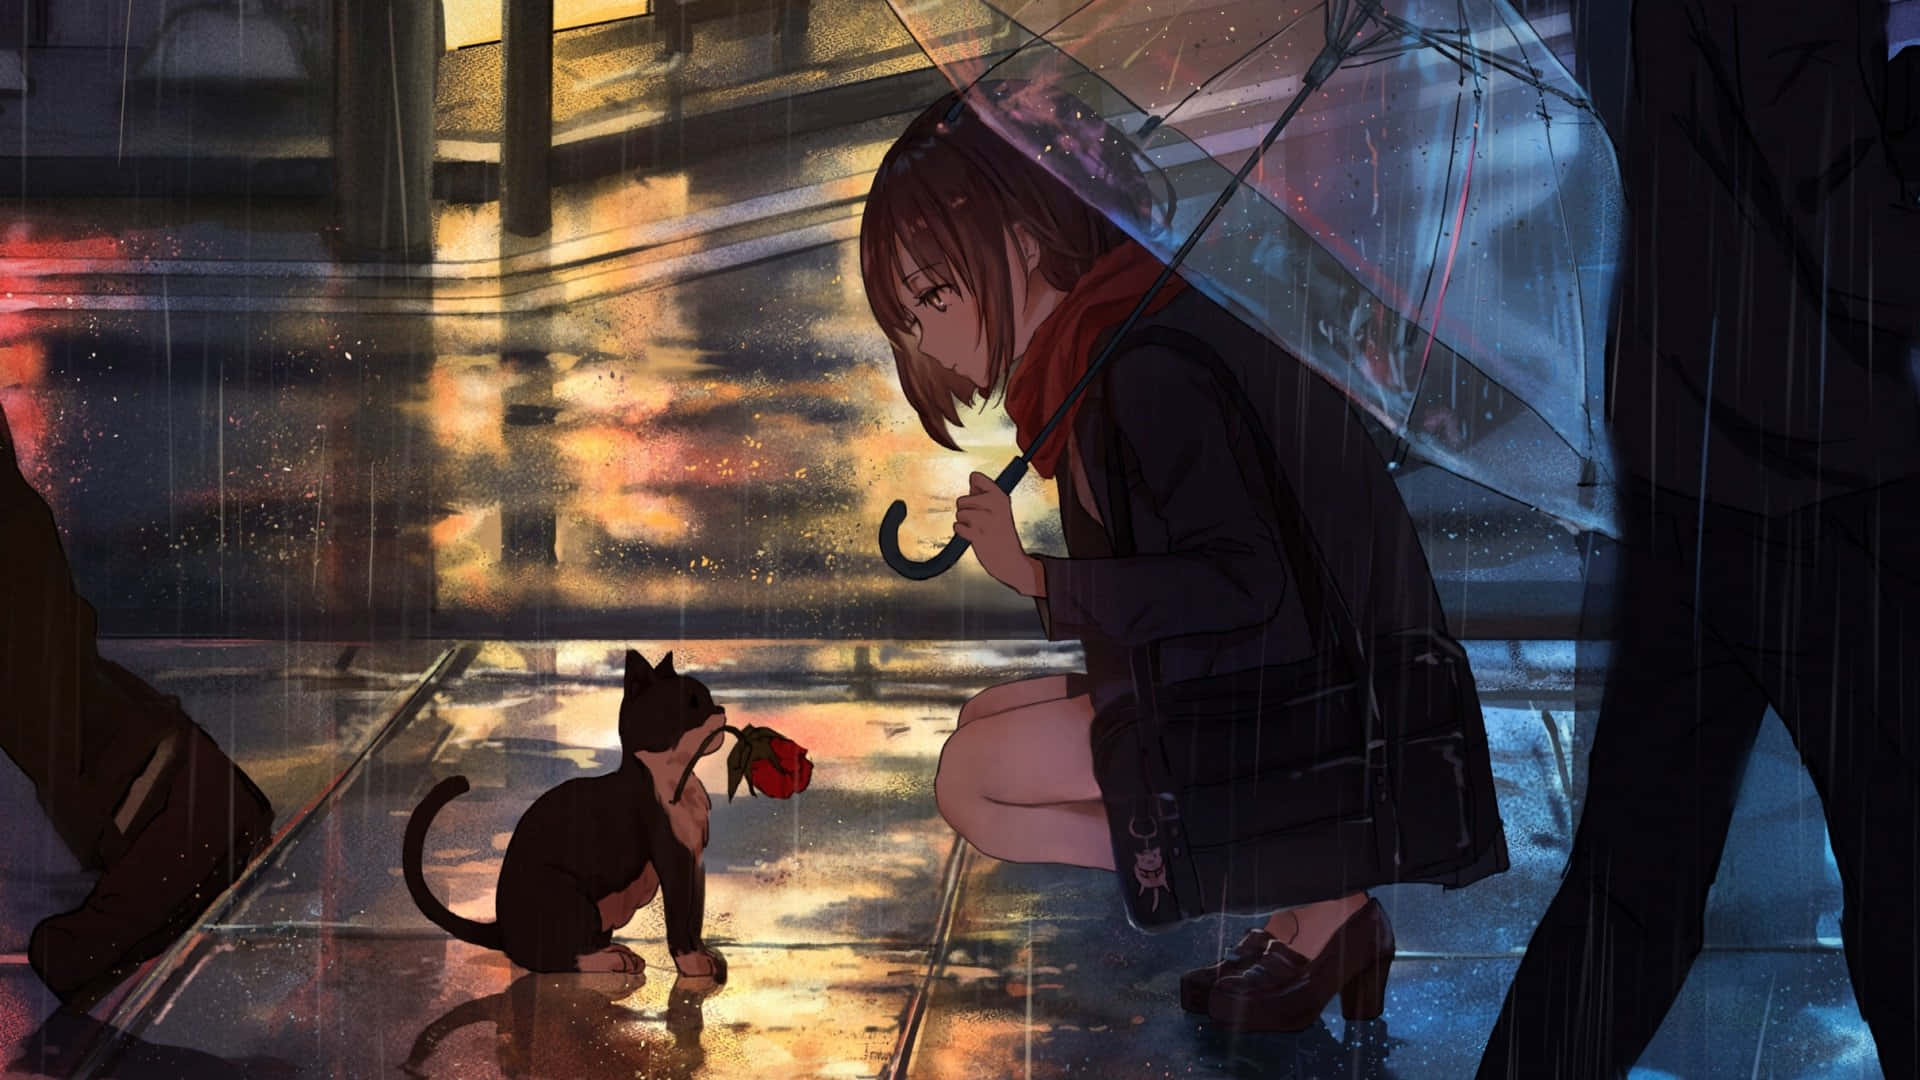 Get lost in the beauty of a rainy anime day Wallpaper